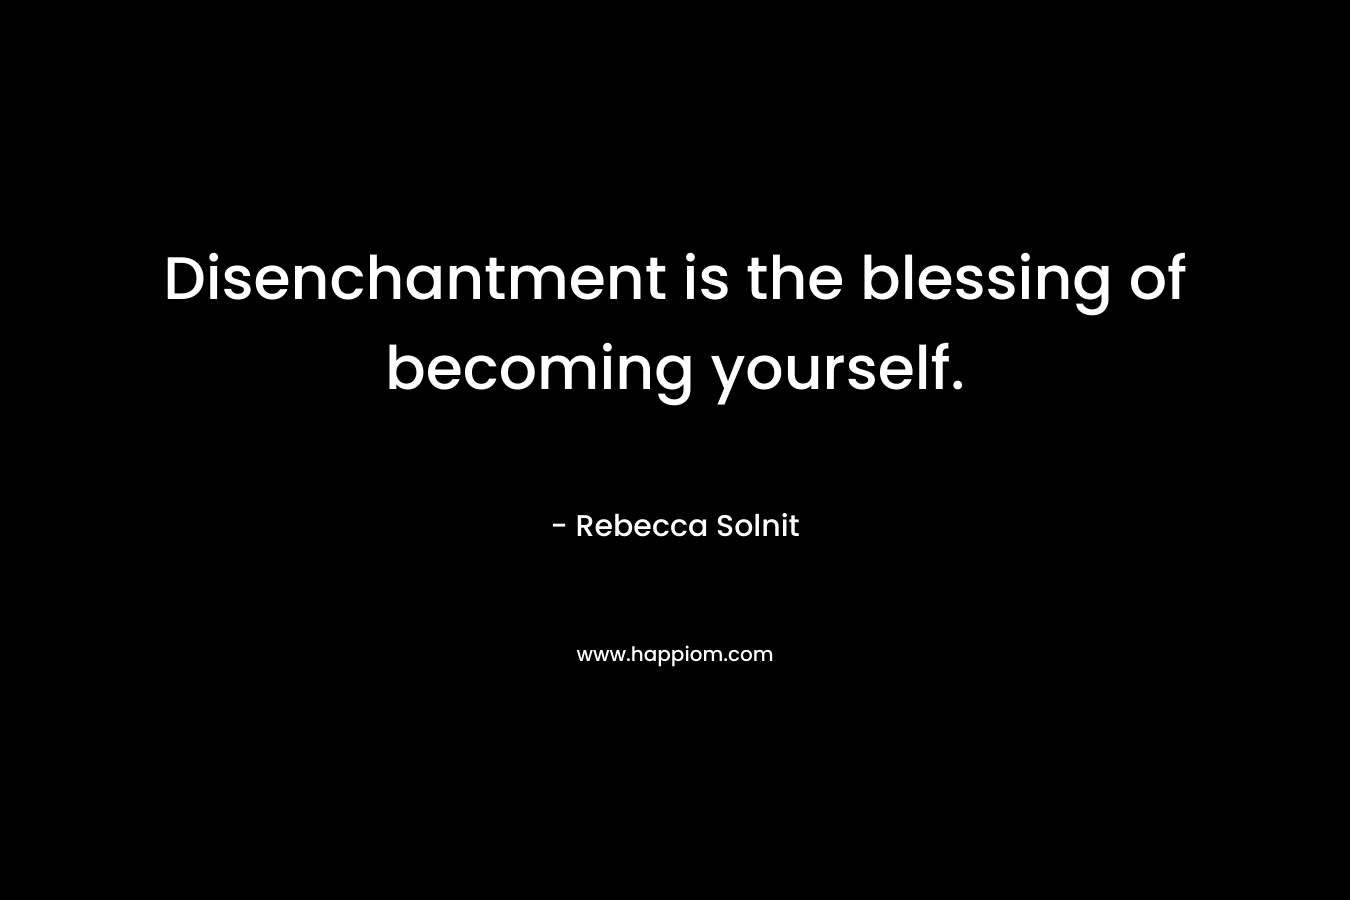 Disenchantment is the blessing of becoming yourself. – Rebecca Solnit